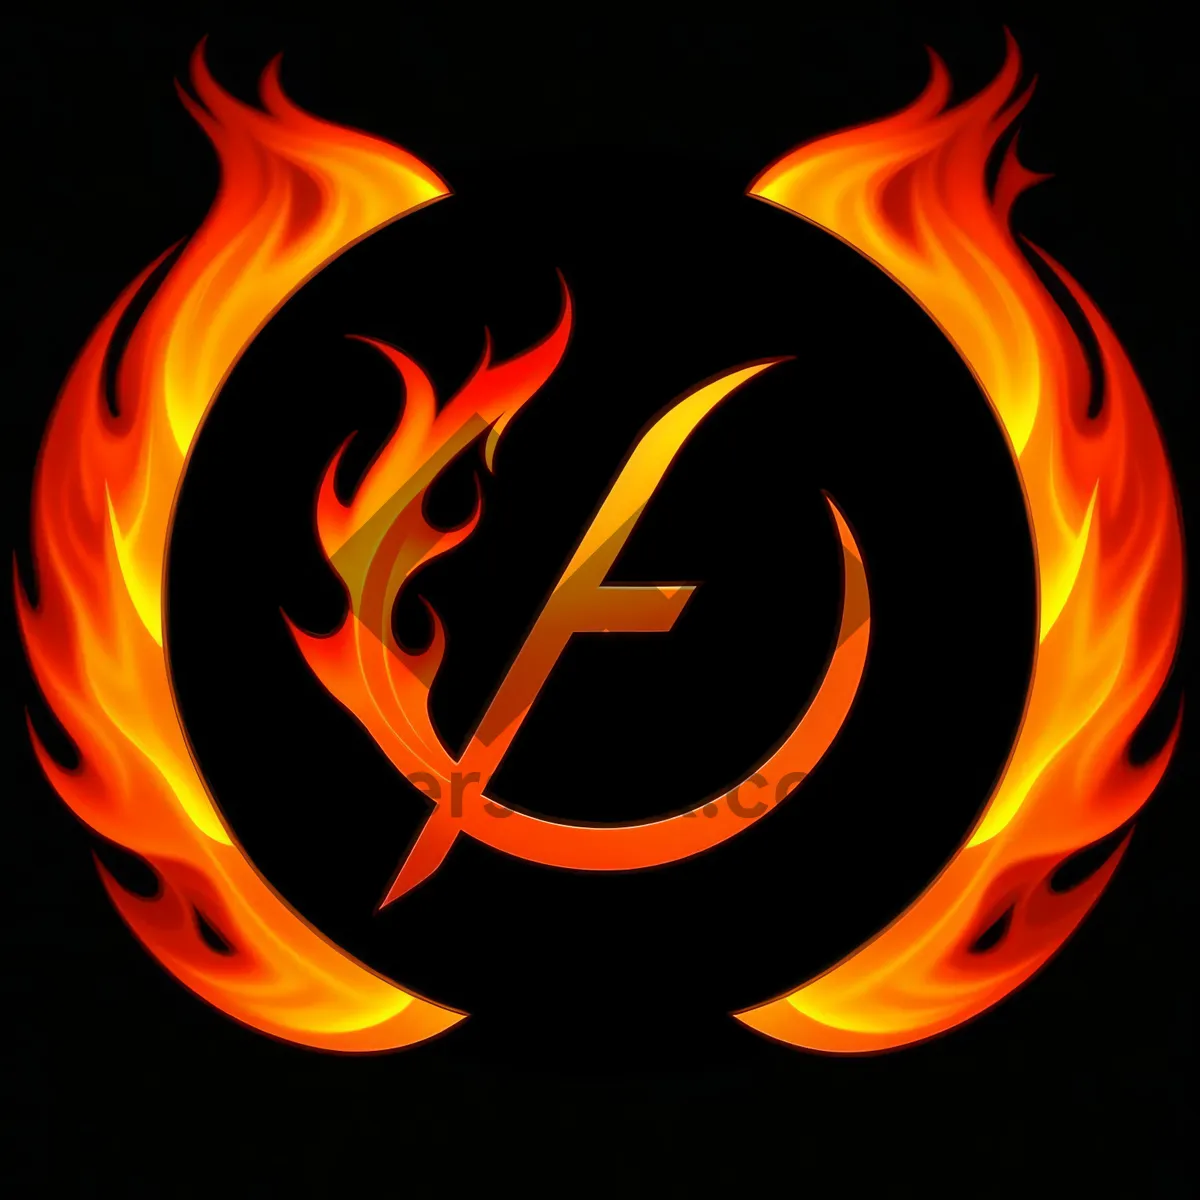 Picture of Blazing Fire Icon - Fiery Heat in Bold Design.